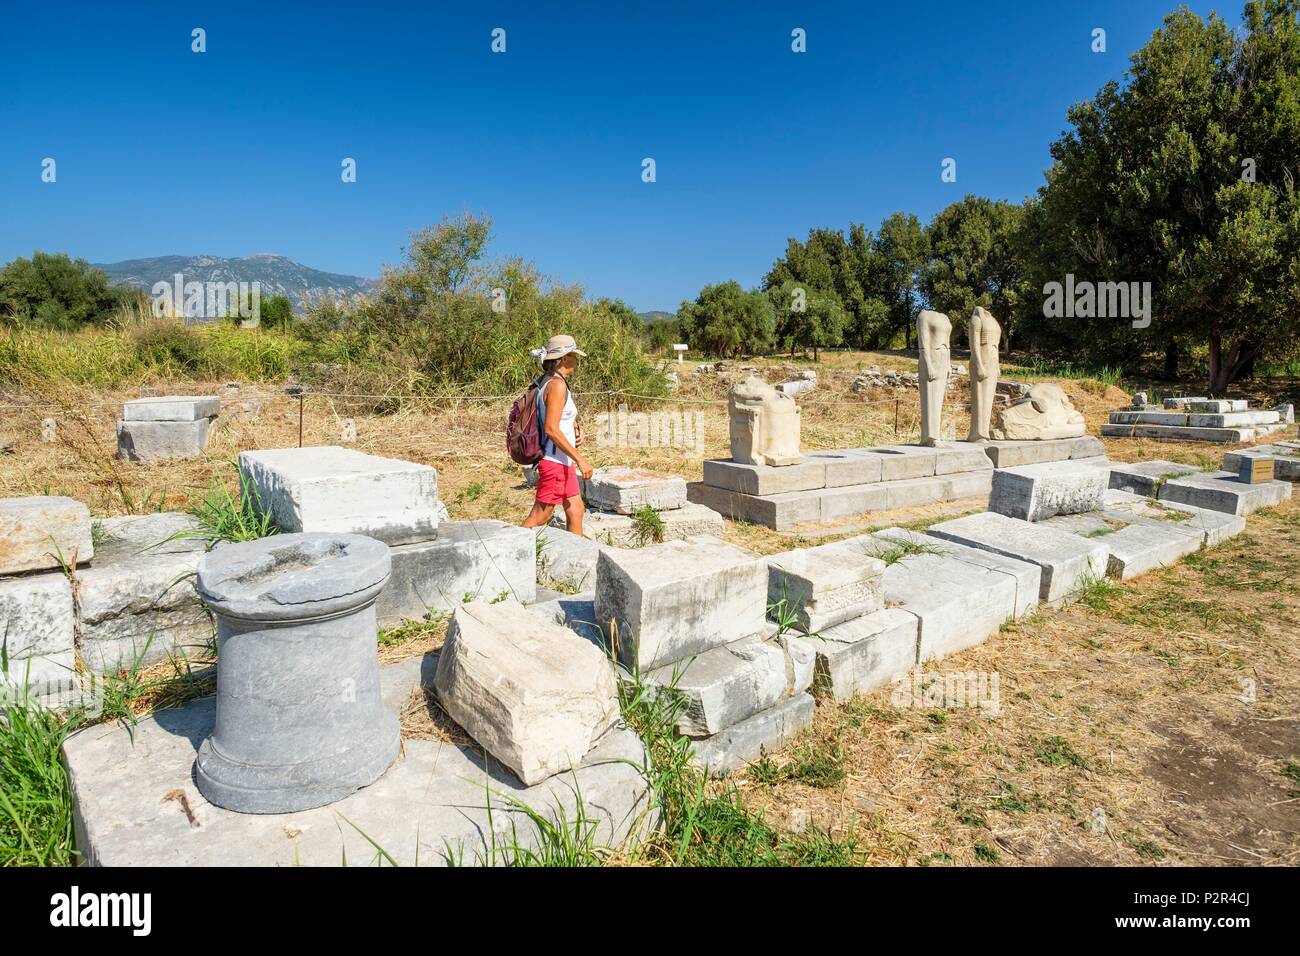 Greece, Samos island, the Heraion of Samos is one of the most important giant Ionic sanctuaries of Ancient Greece, dedicated to the goddess Hera (UNESCO world heritage site), statue group by Geneleos Stock Photo